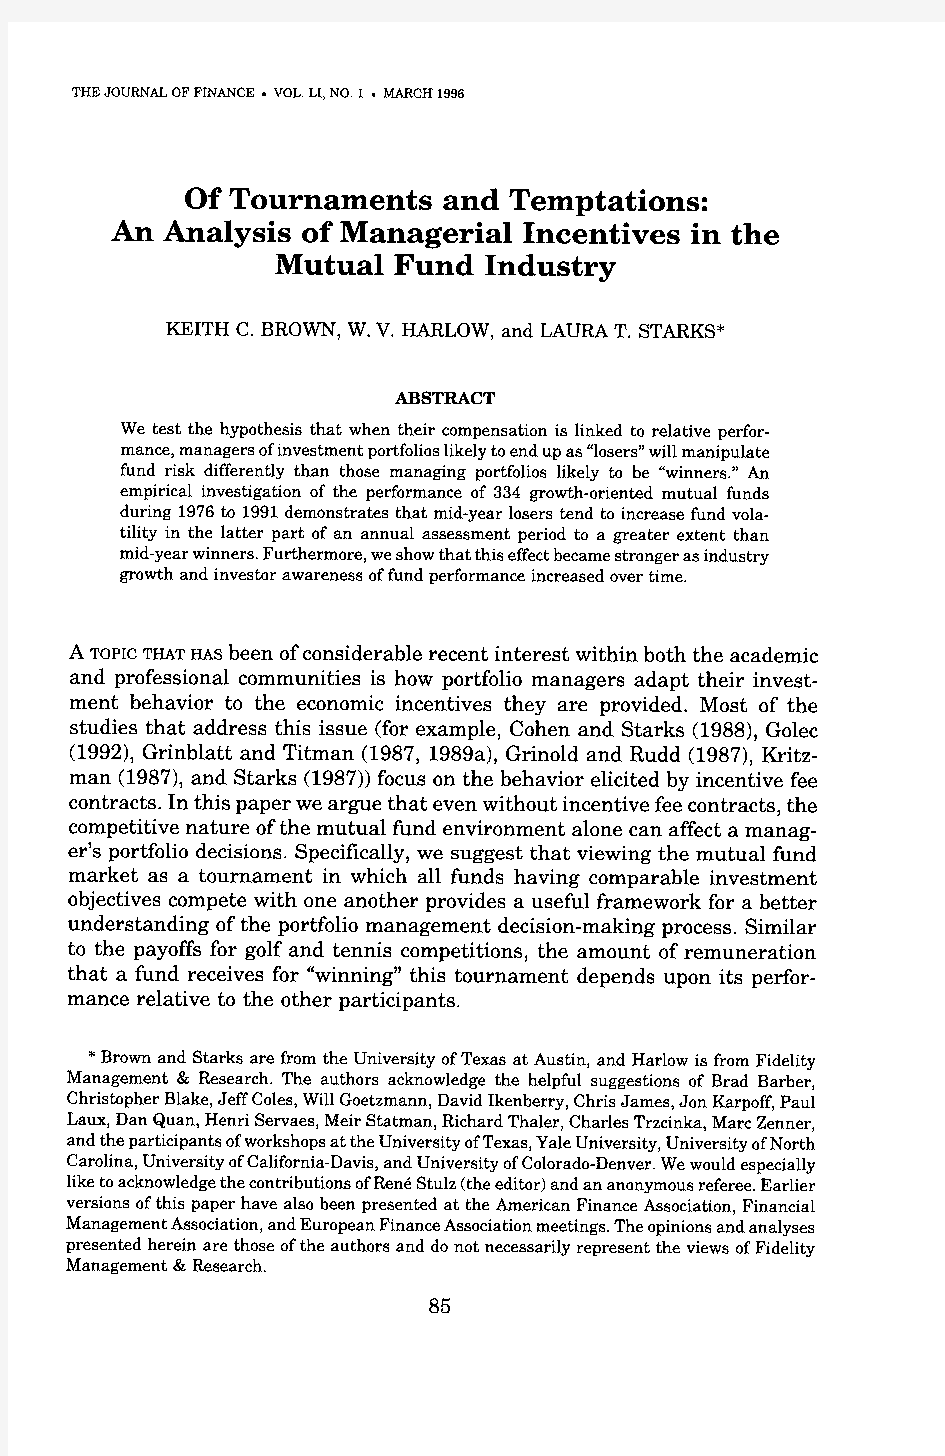 Of Tournaments and Temptations  An Analysis of Managerial Incentives in the Mutual Fund Industry